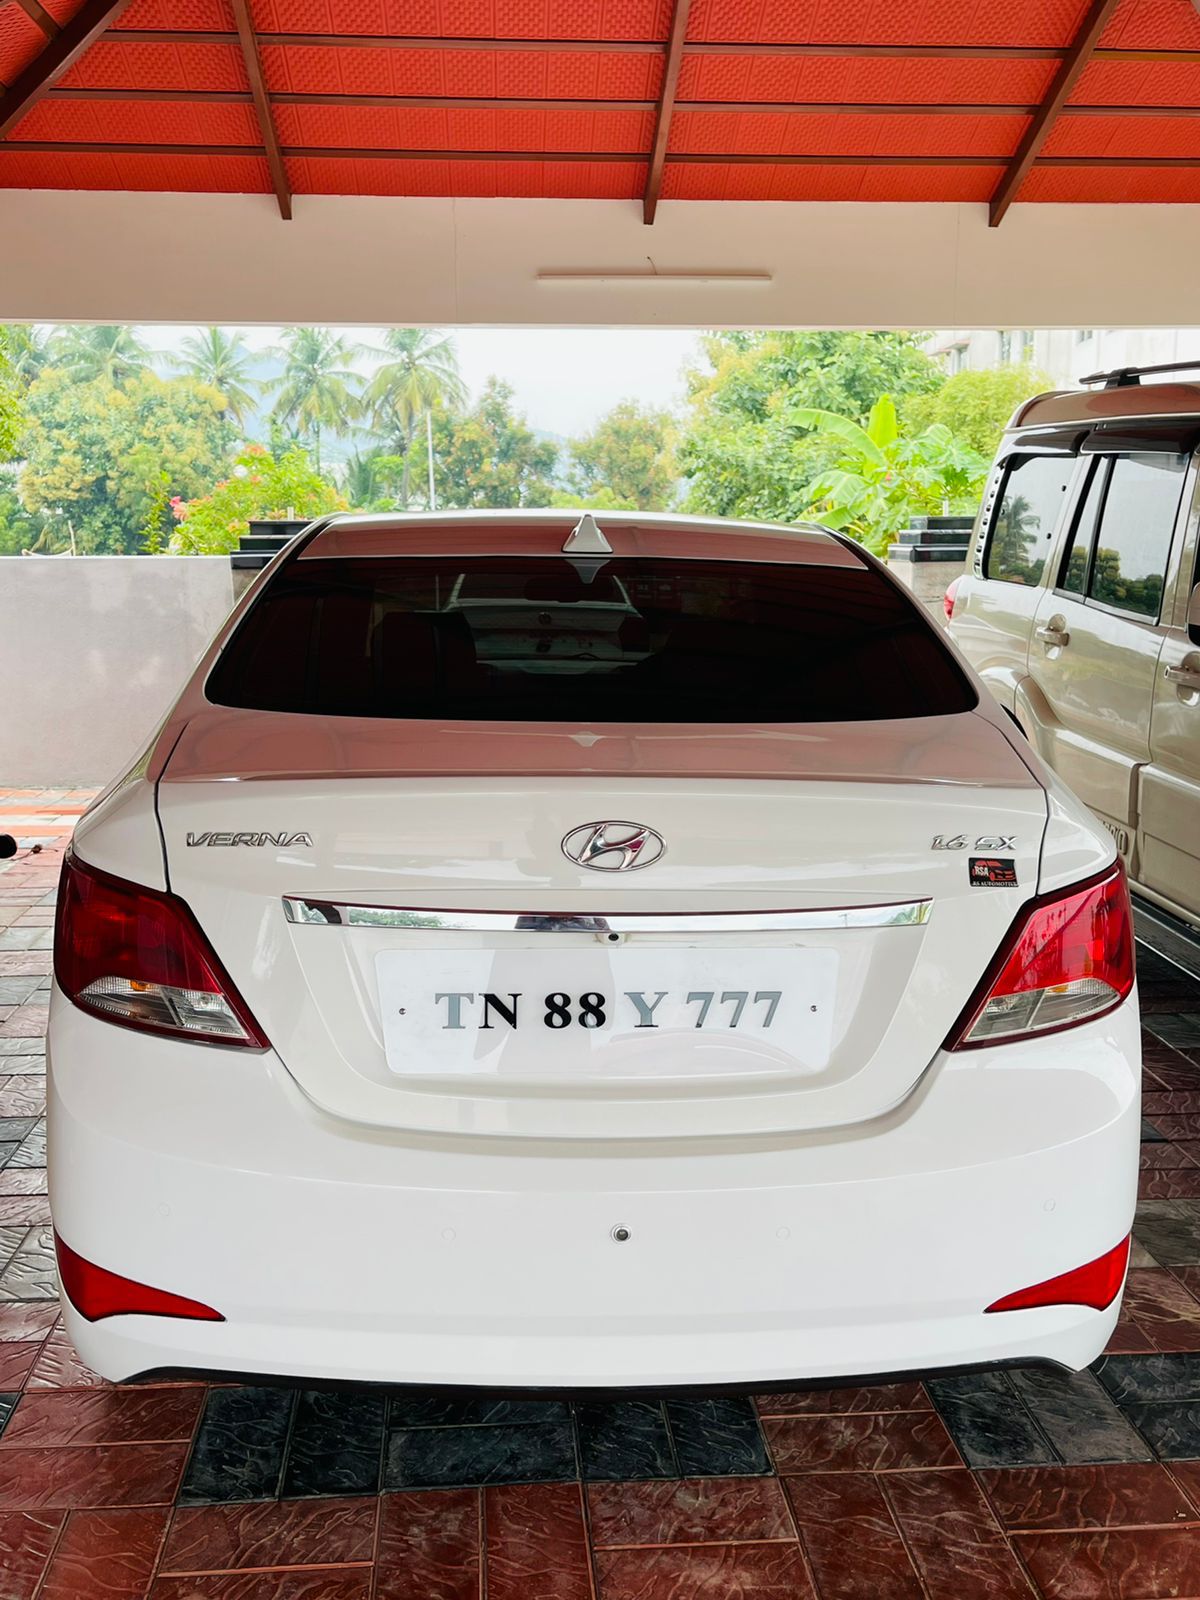 3919-for-sale-Hyundai-Verna-Fluidic-Diesel-First-Owner-2016-TN-registered-rs-750000